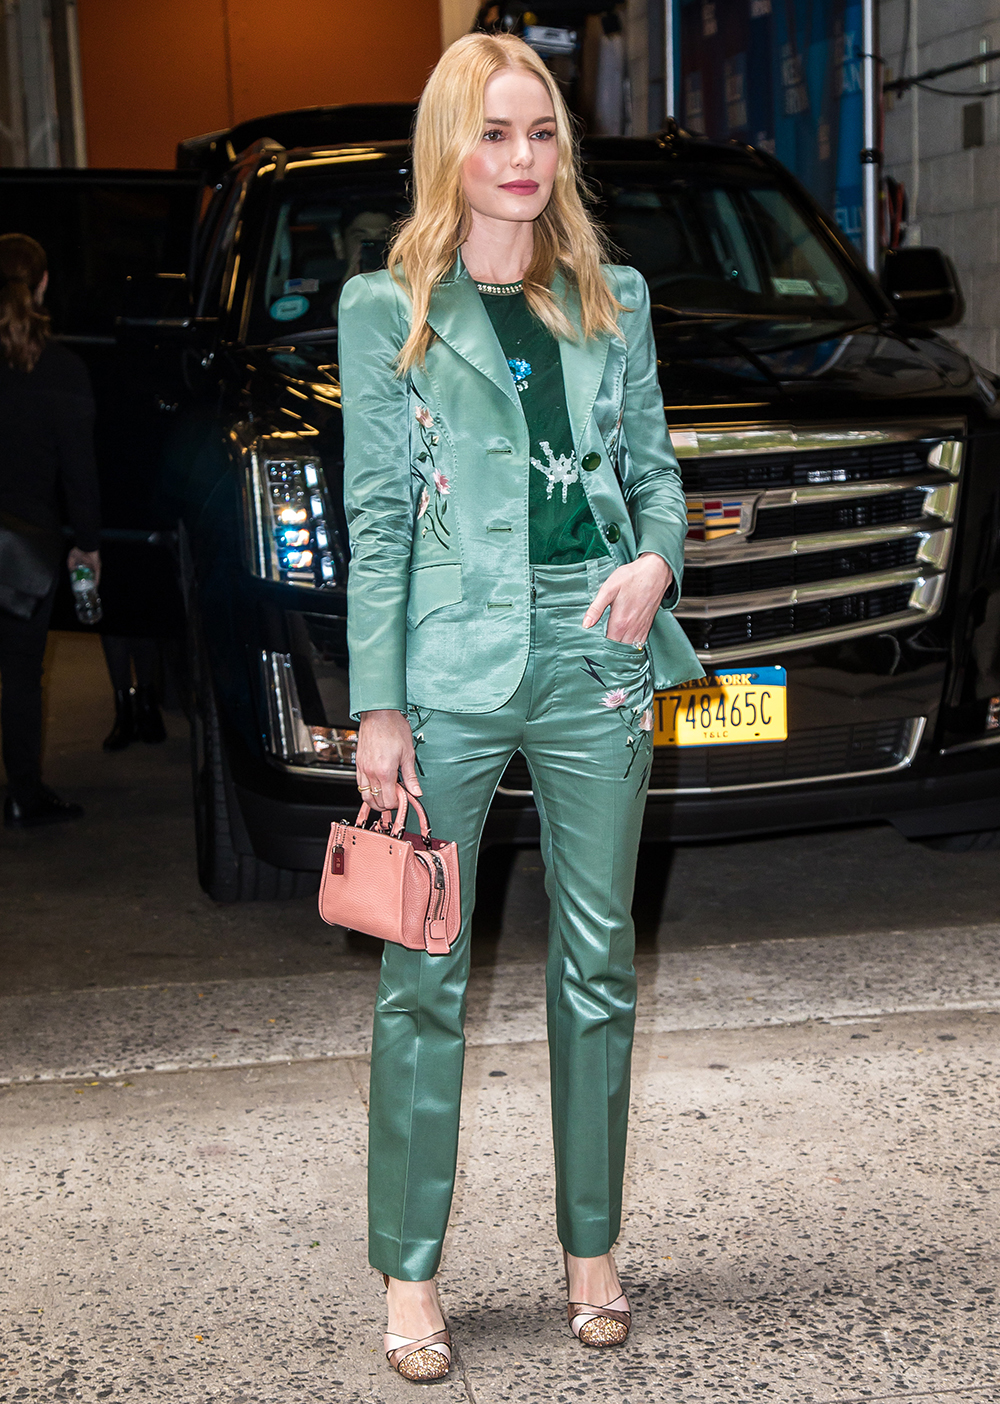 A beautiful emerald green silk suit from Coach 1941 paired with a Coach bag and shoes.